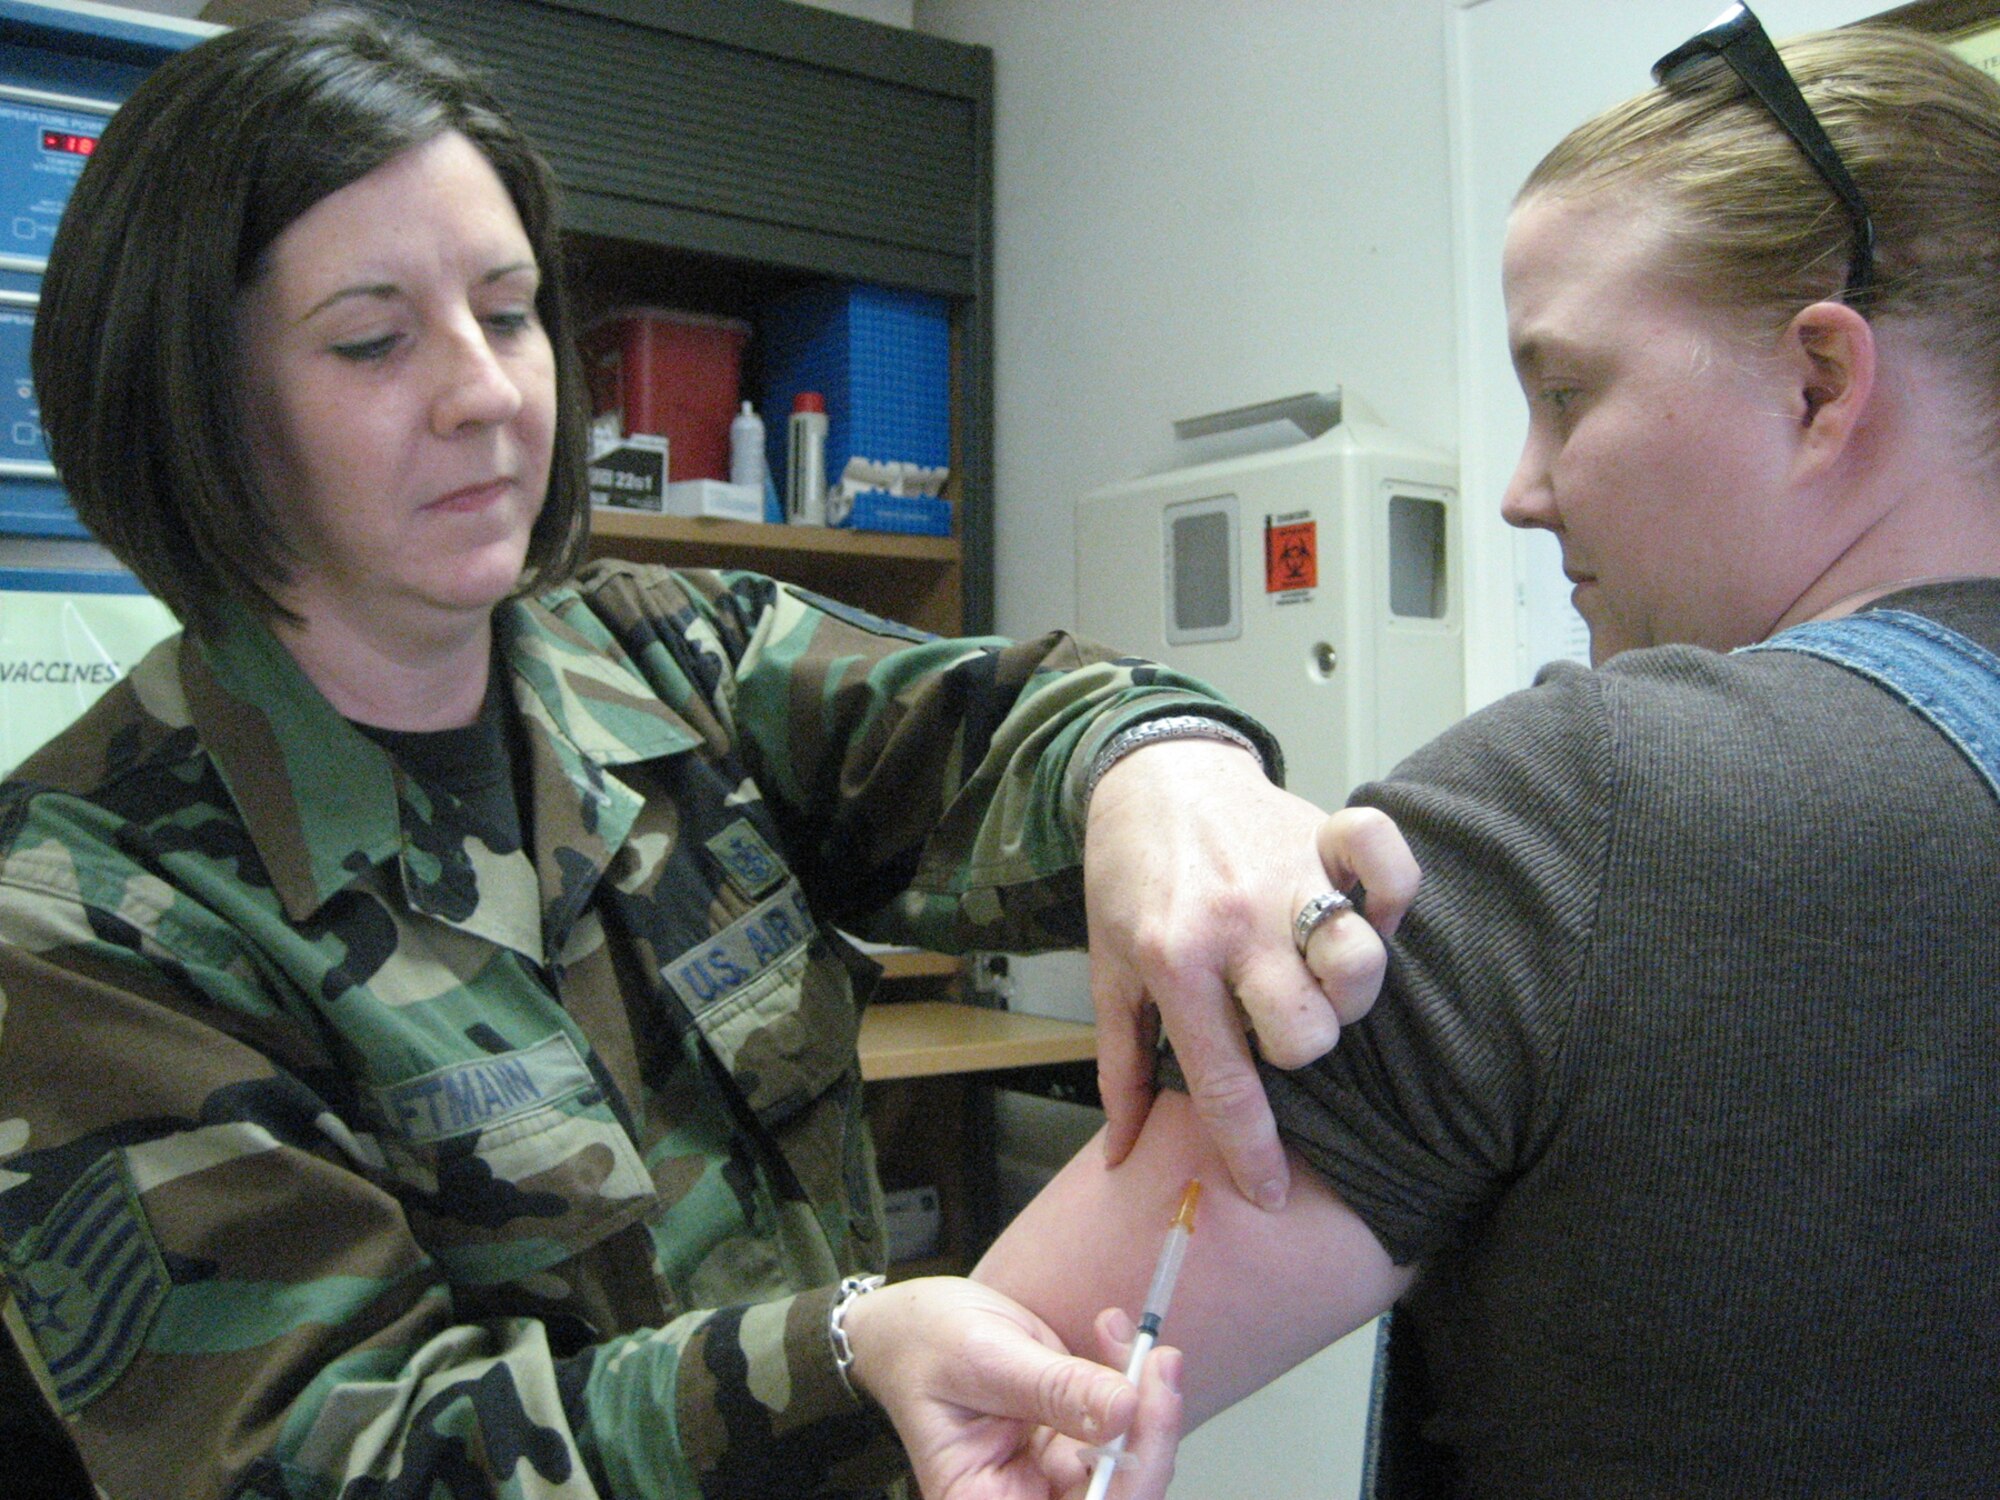 SPANGDAHLEM AIR BASE, GERMANY -- Tech. Sgt. Terri Elftmann, 52nd Medical Operations Squadron NCOIC Allergy/Immunization Clinic, administers an Anthrax shot March 16 at the immunization clinic here to Senior Airman Wendy Salas, 52nd Maintenance Operations Squadron information manager. The shot was Airman Salas’ fifth shot; the initial series of Anthrax shots is six. The Air Force started an anthrax vaccine immunization program for Airmen assigned to high-threat areas. Airman Salas deploys this summer. (US Air Force photo/Staff Sgt. Andrea Knudson)